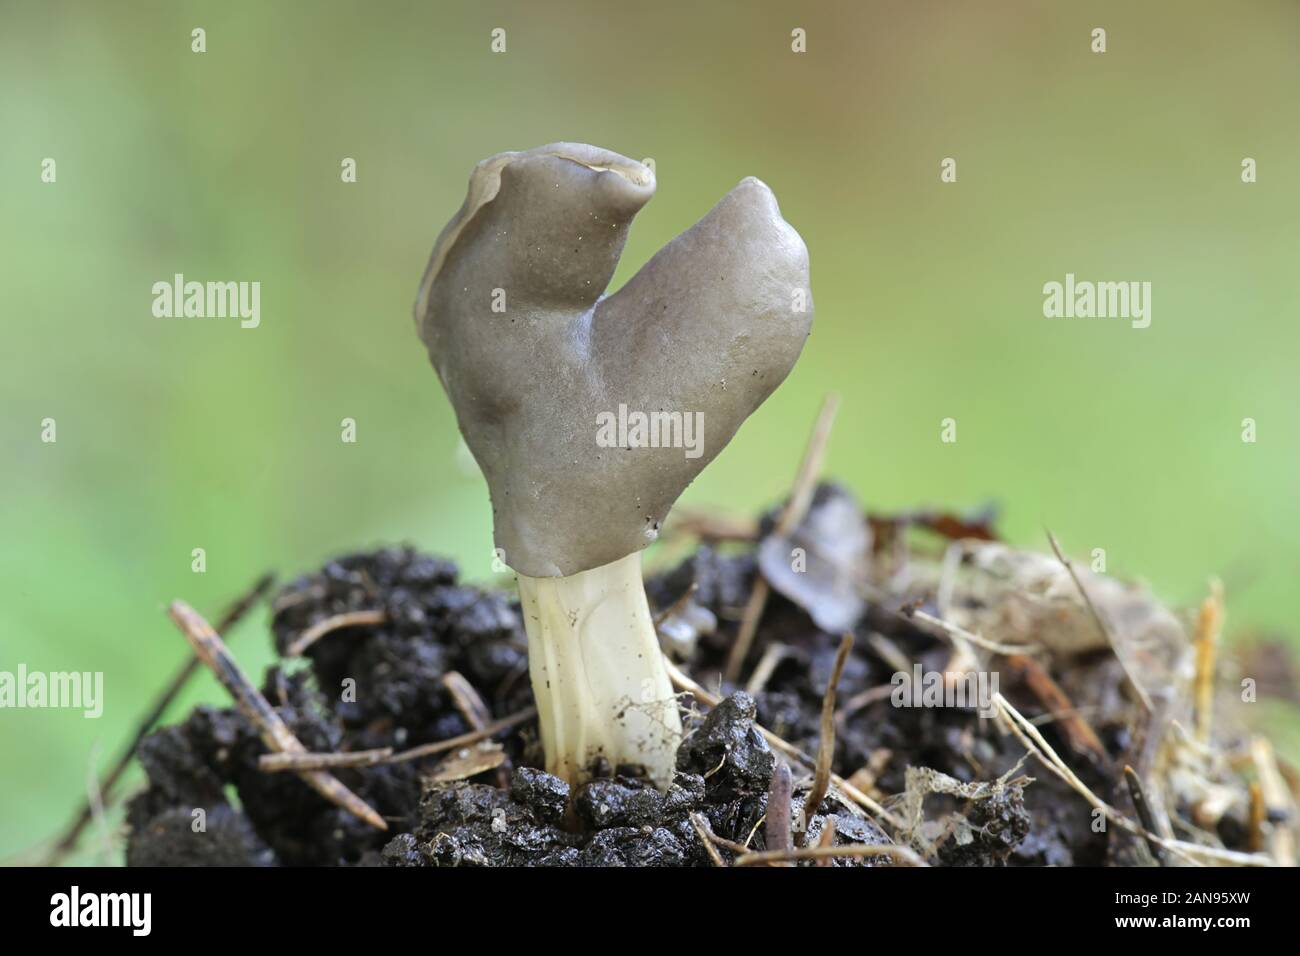 Helvella lacunosa, known as the slate grey saddle or fluted black elfin saddle, mushrooms from Finland Stock Photo